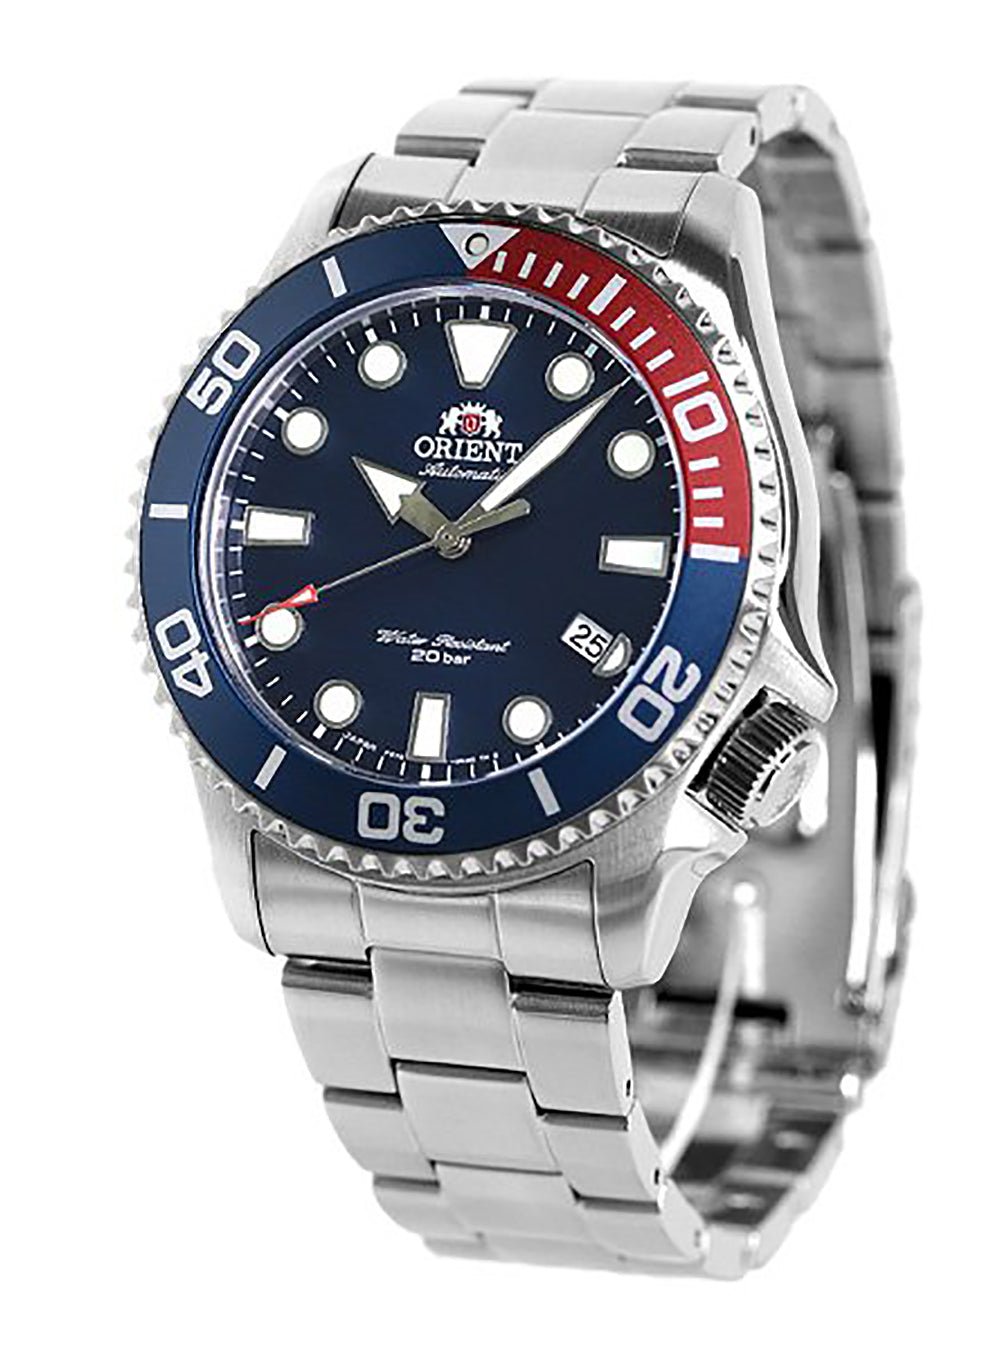 ORIENT SPORTS DIVER STYLE RN-AC0K03L MADE IN JAPAN JDMWRISTWATCHjapan-select